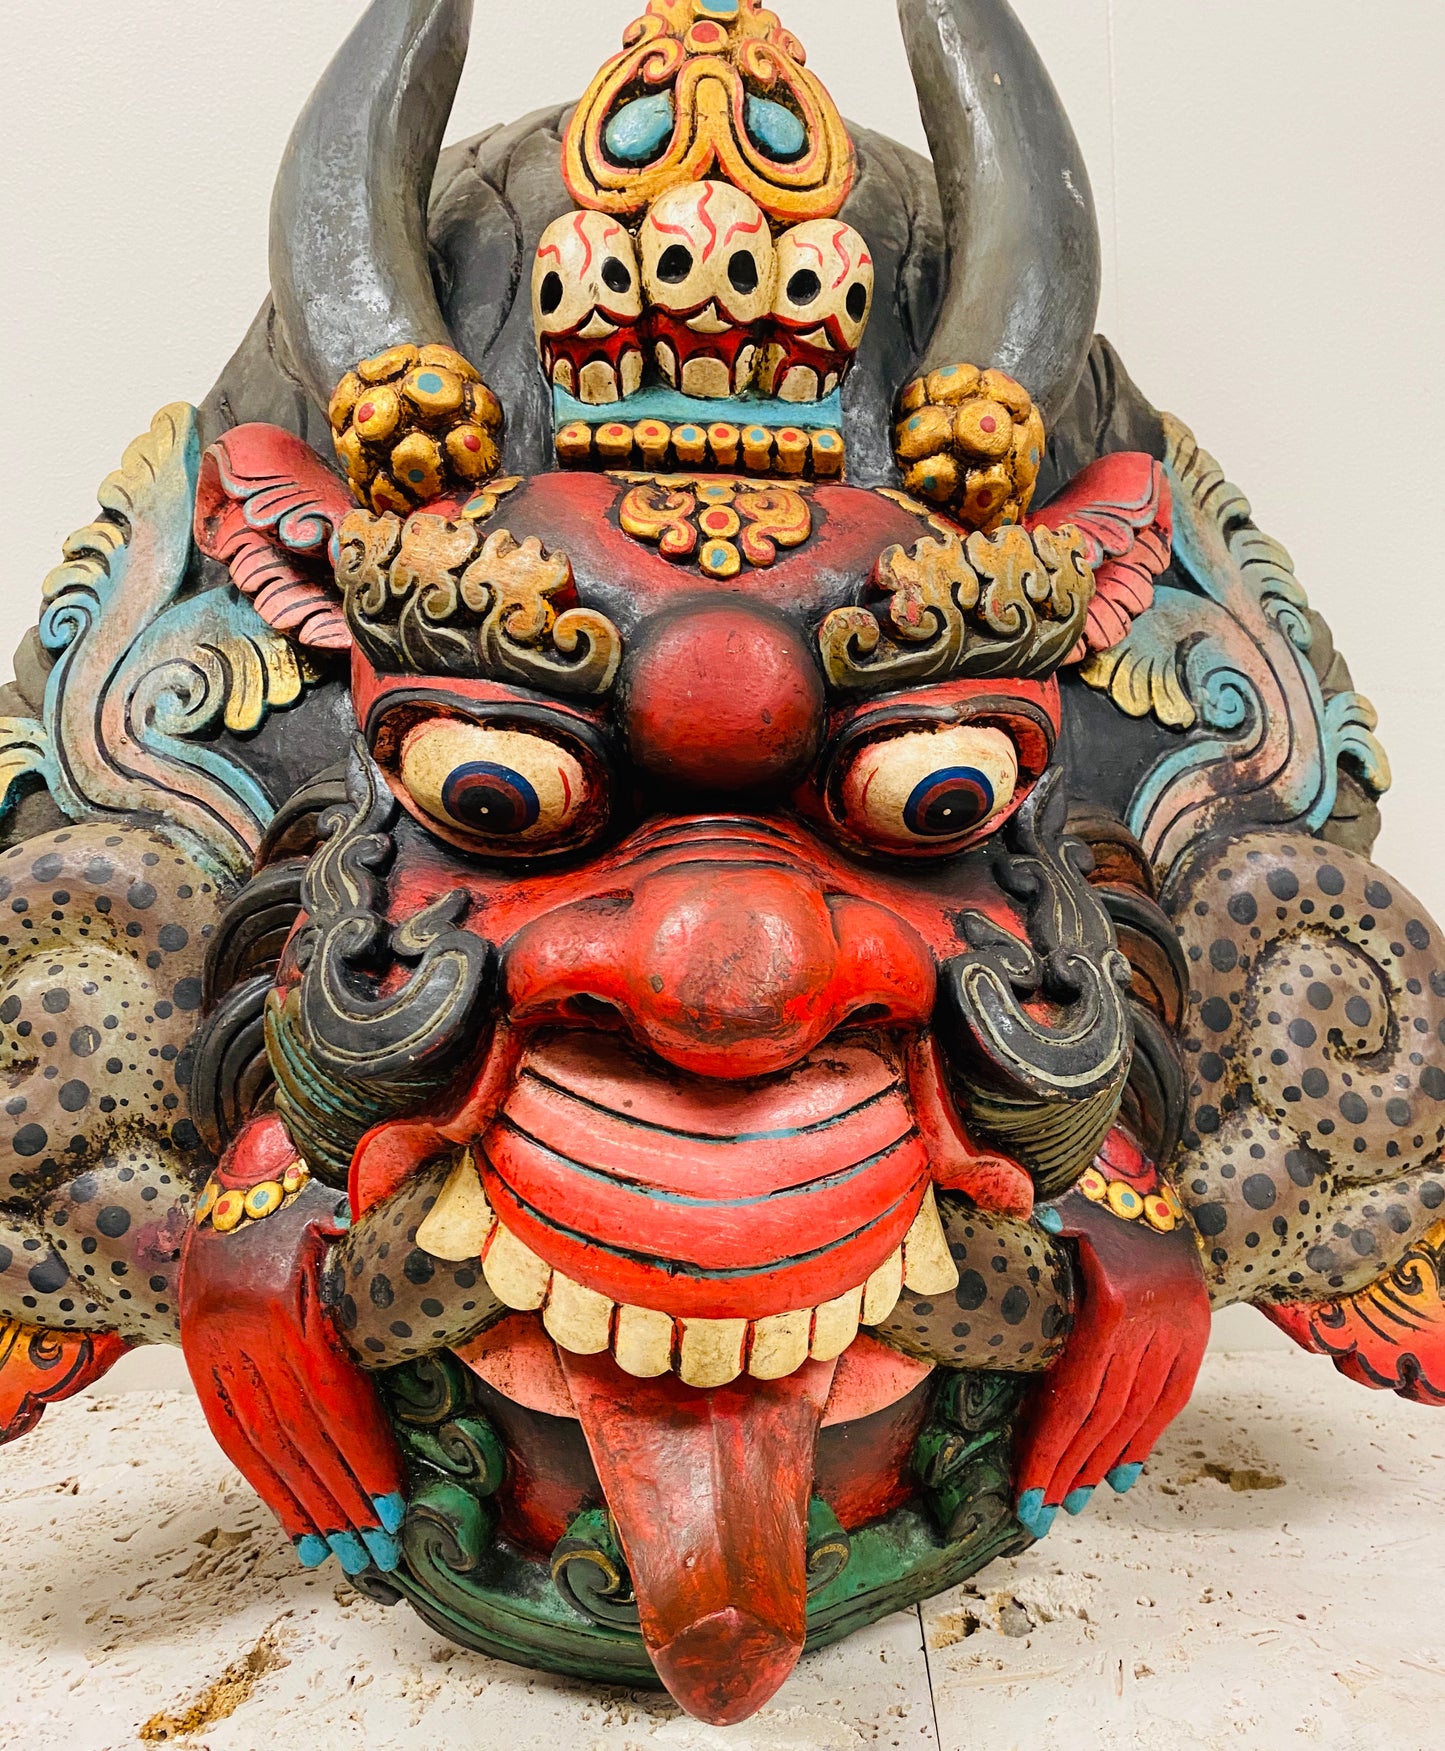 Hand Carved and Painted Cheppu Masks from Nepal 24" x 23"